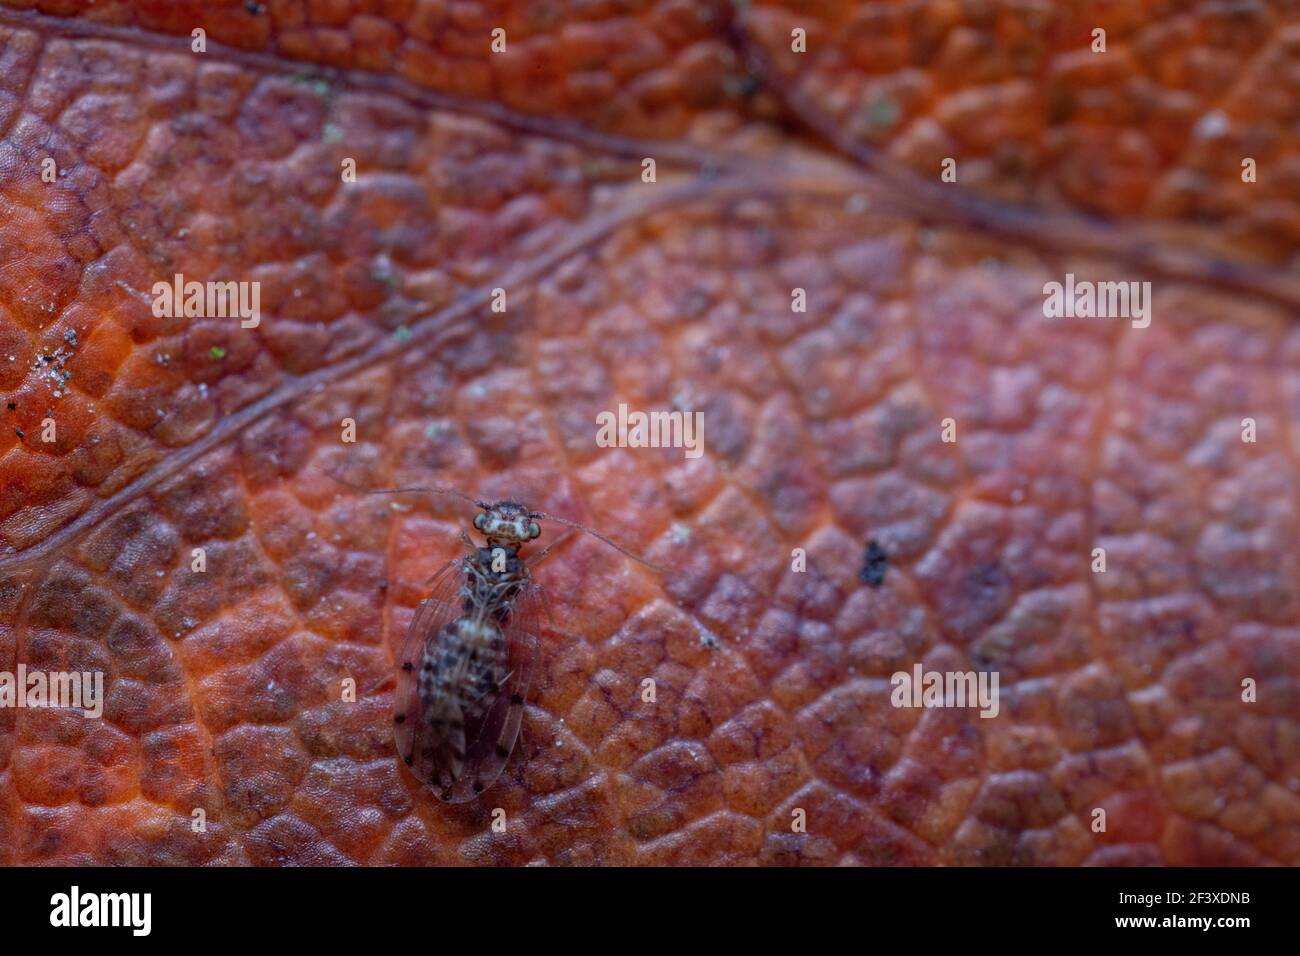 Psocoptera in close view on dead leaf Stock Photo